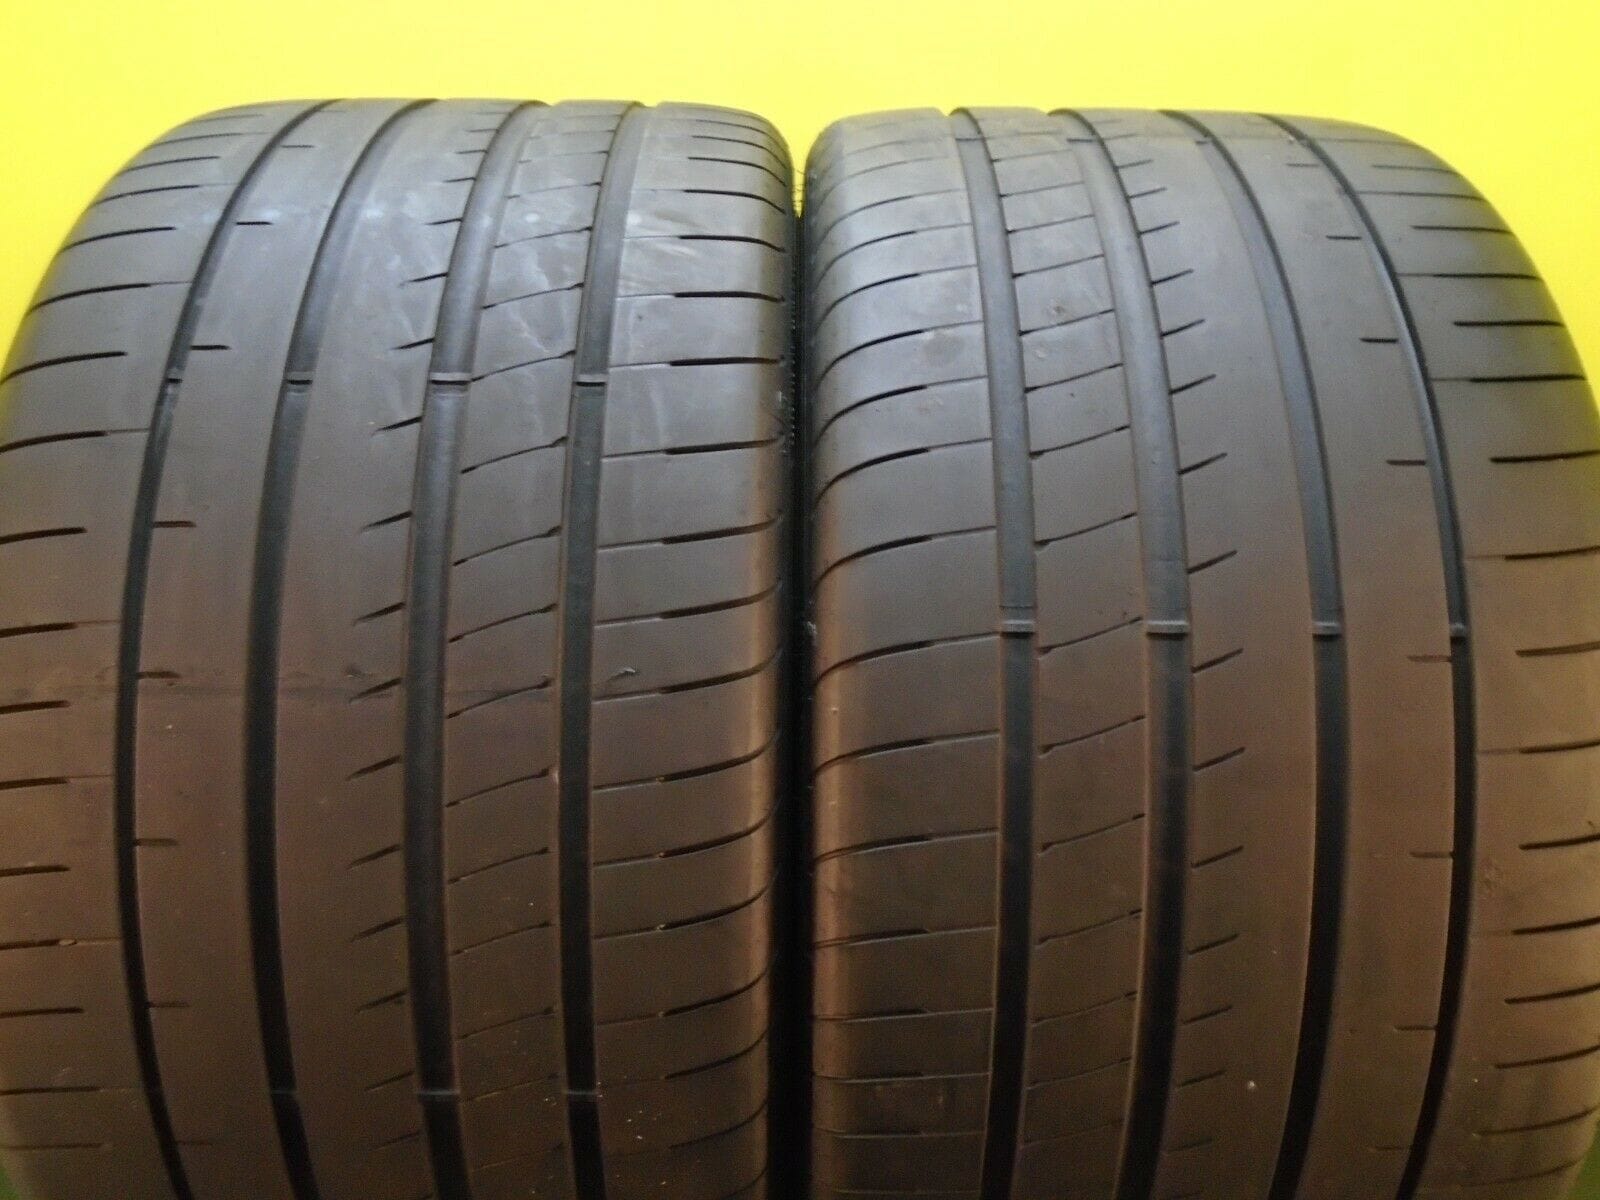 Wheels and Tires/Axles - 2 Great condition Goodyear Eagle F1 tires 305/20r21 70% tread - Used - 0  All Models - Clinton, NJ 08809, United States